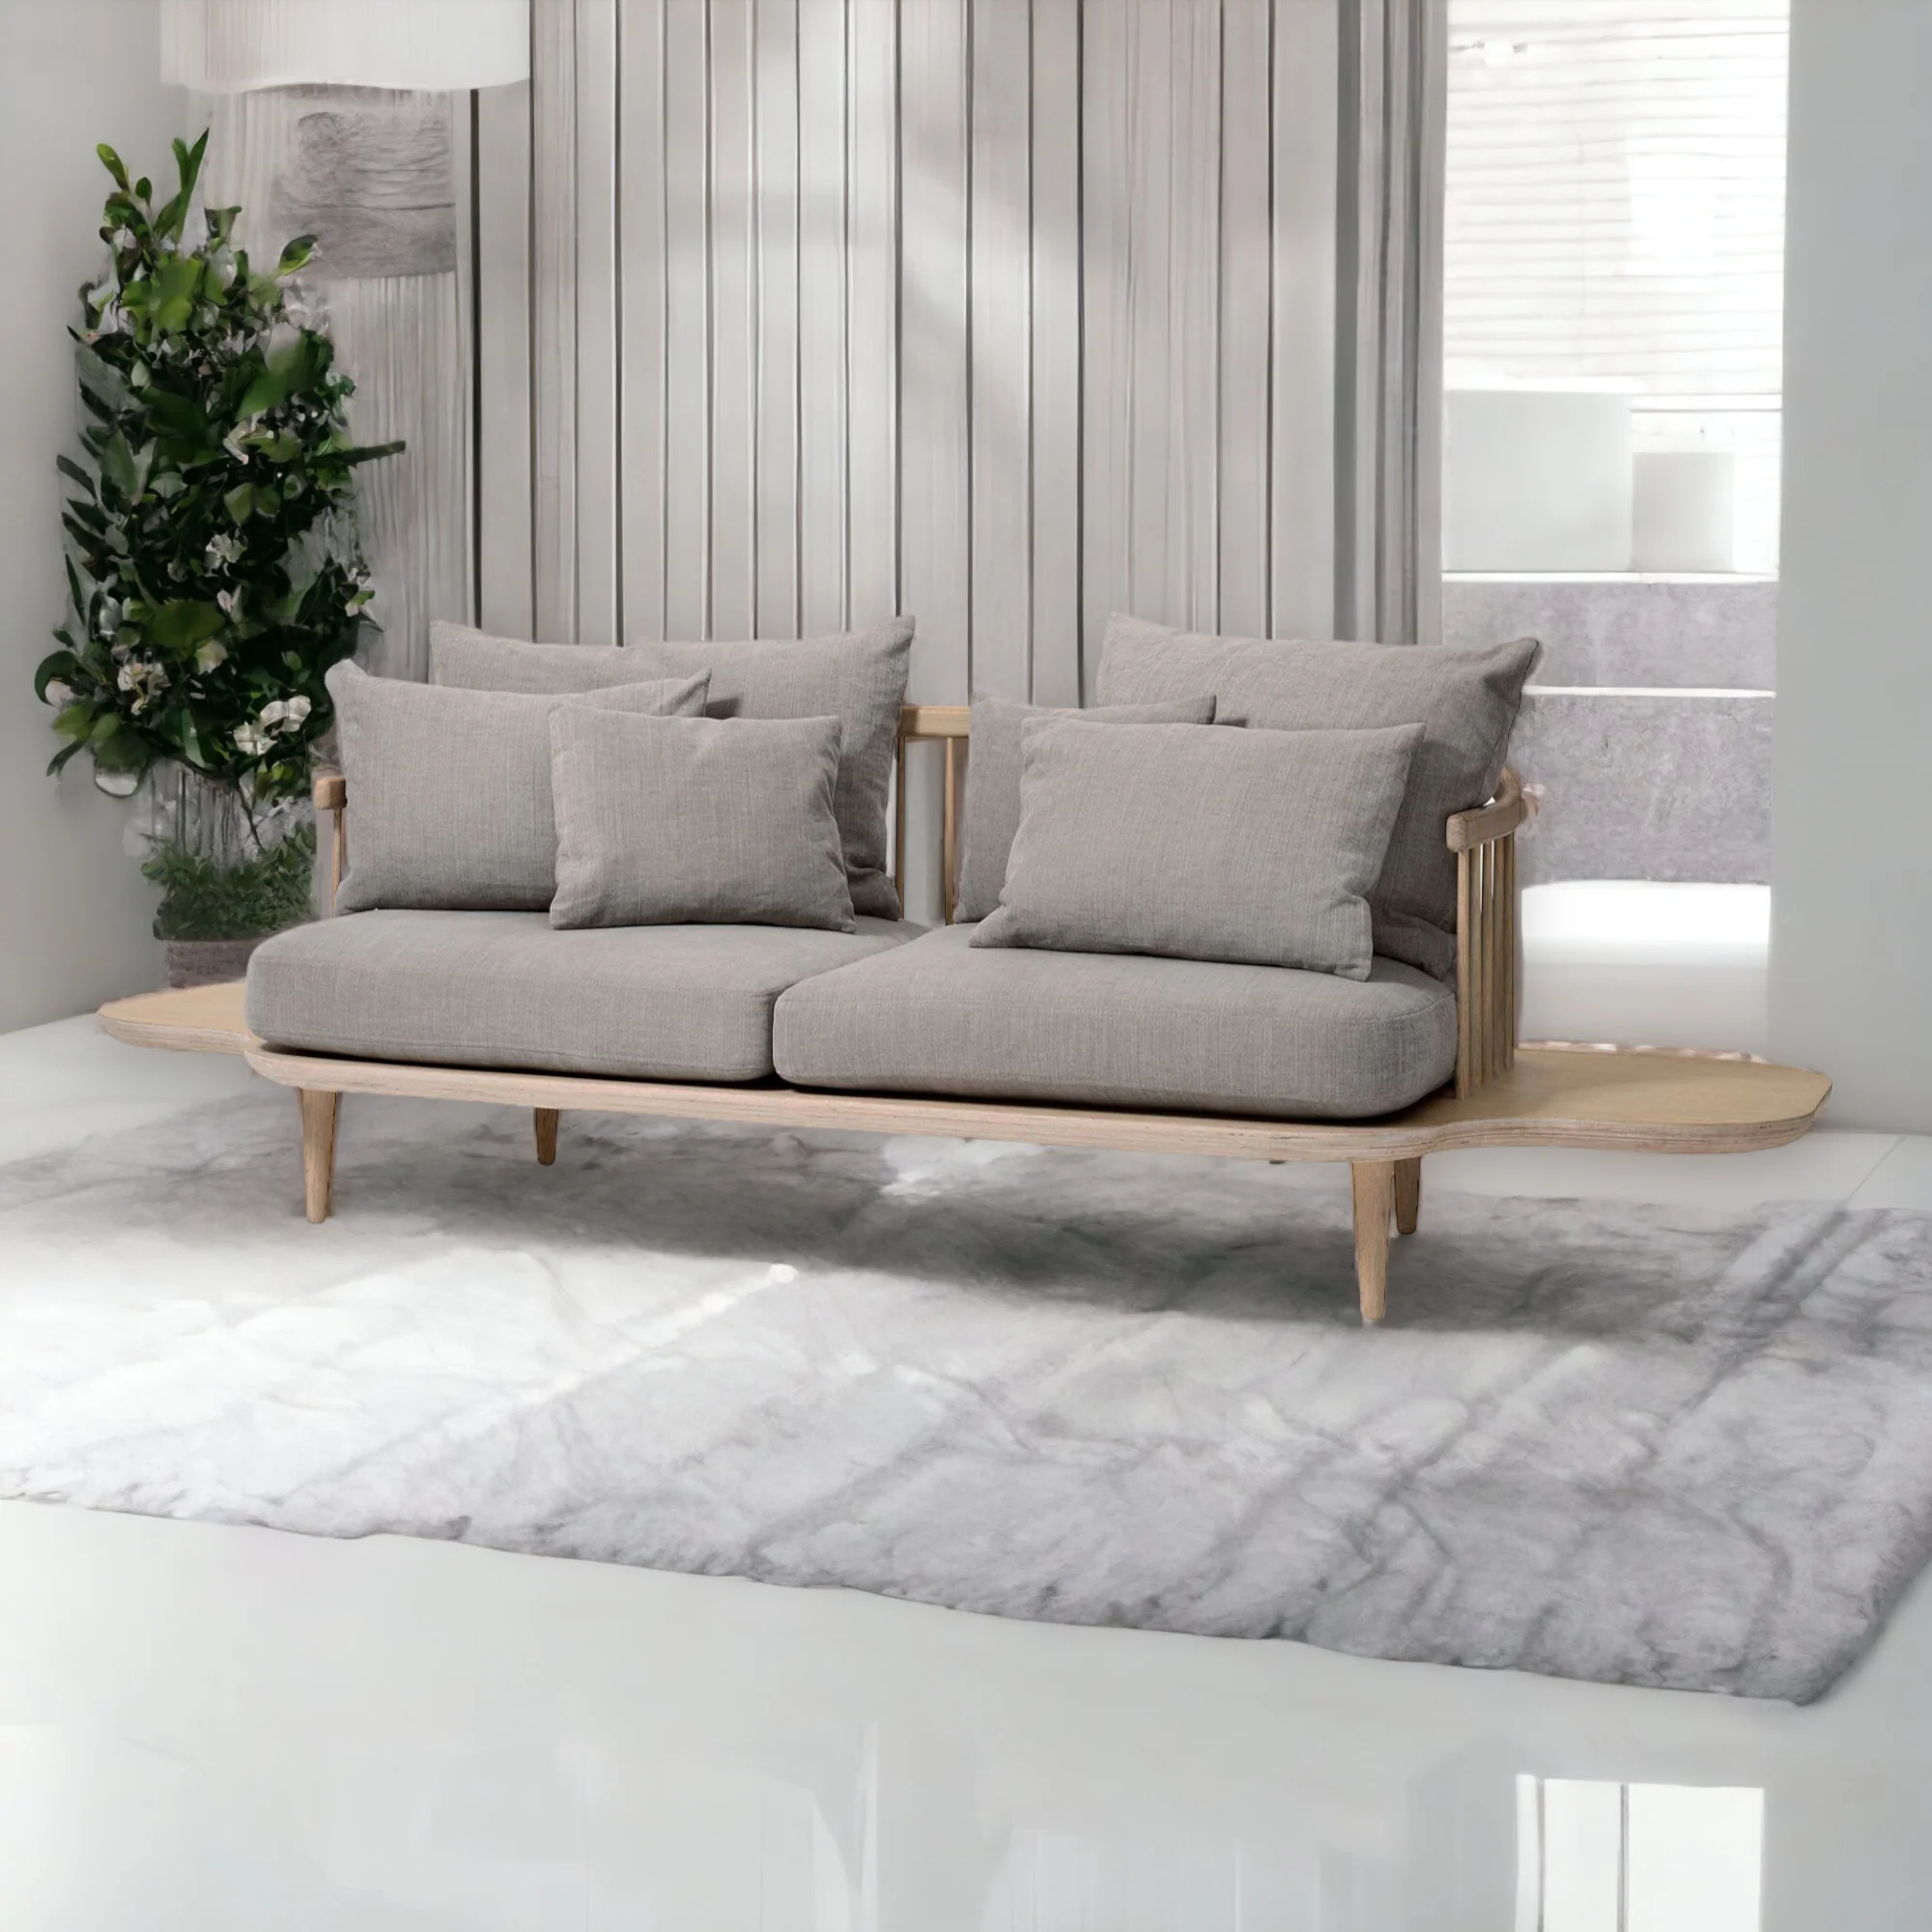 Wooden Sofa Sets: Adding Timeless Appeal to Every Home